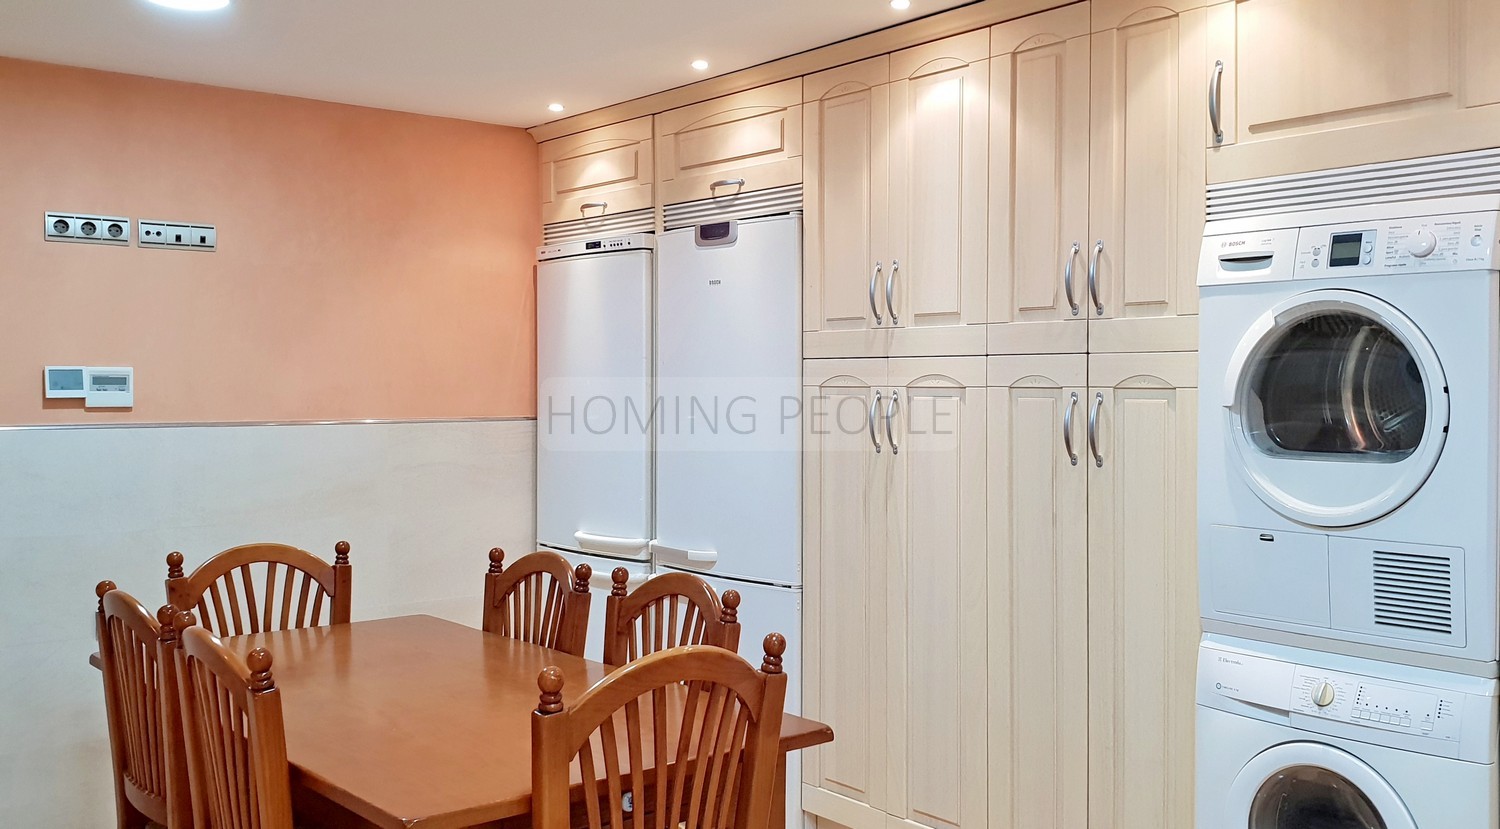 [RENTED OUT]: Bright and good quality flat: Spacious and close to the beach and shops.